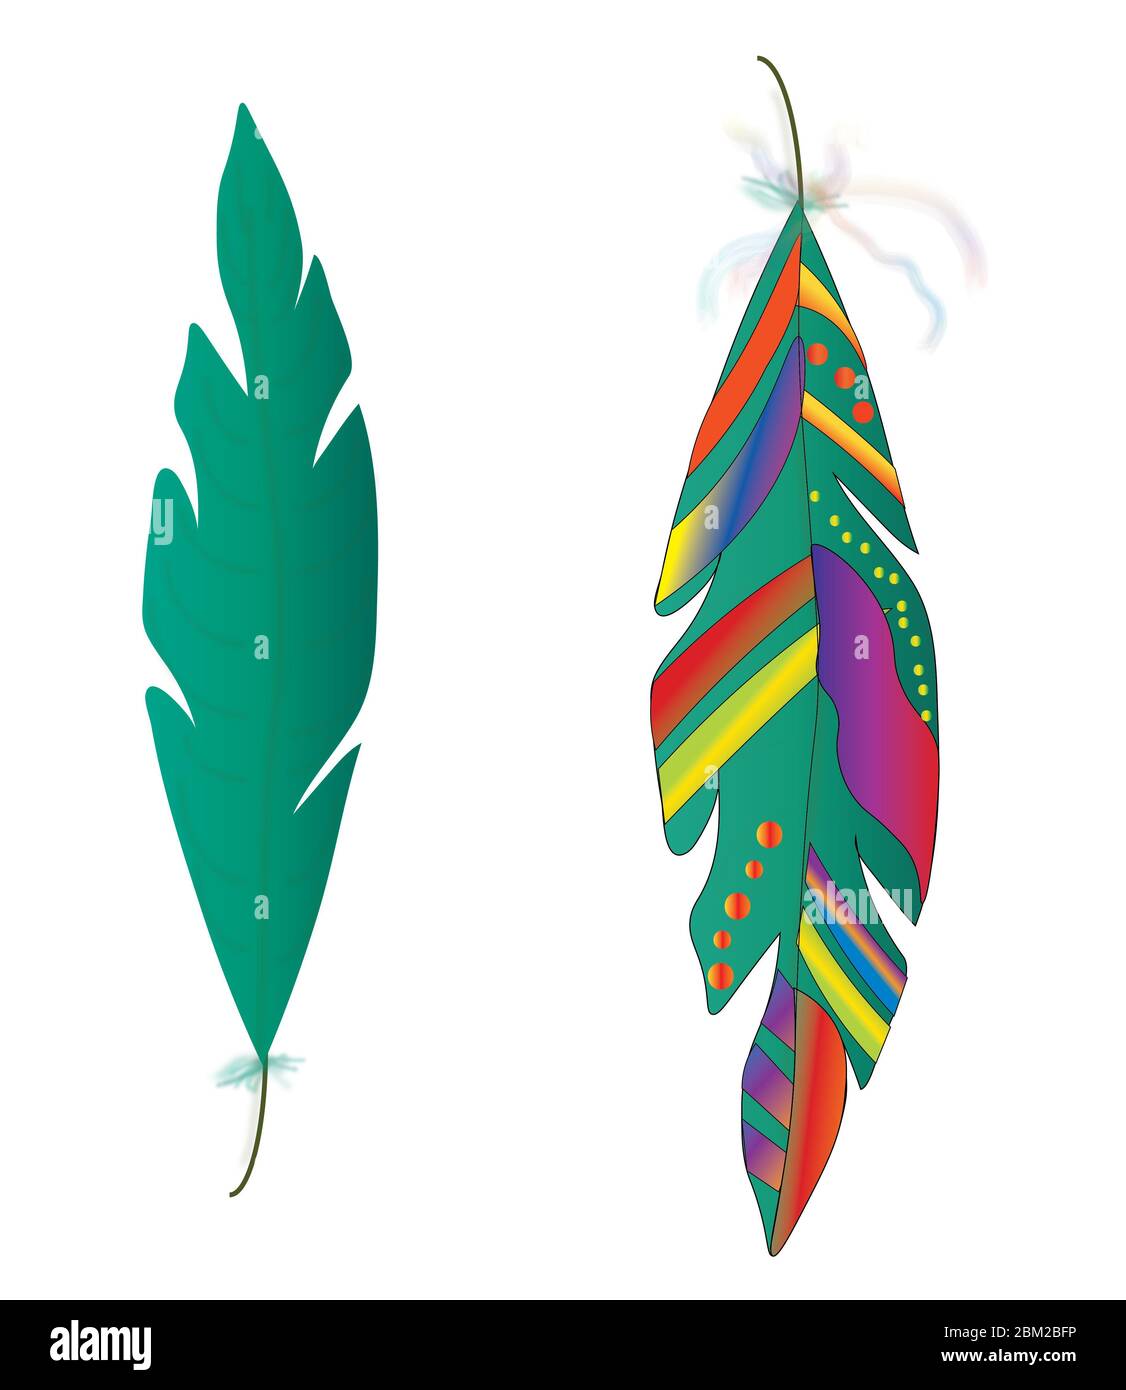 Colorful graphic feathers isolated on white background.  Native American Indian feathers. Stock Photo